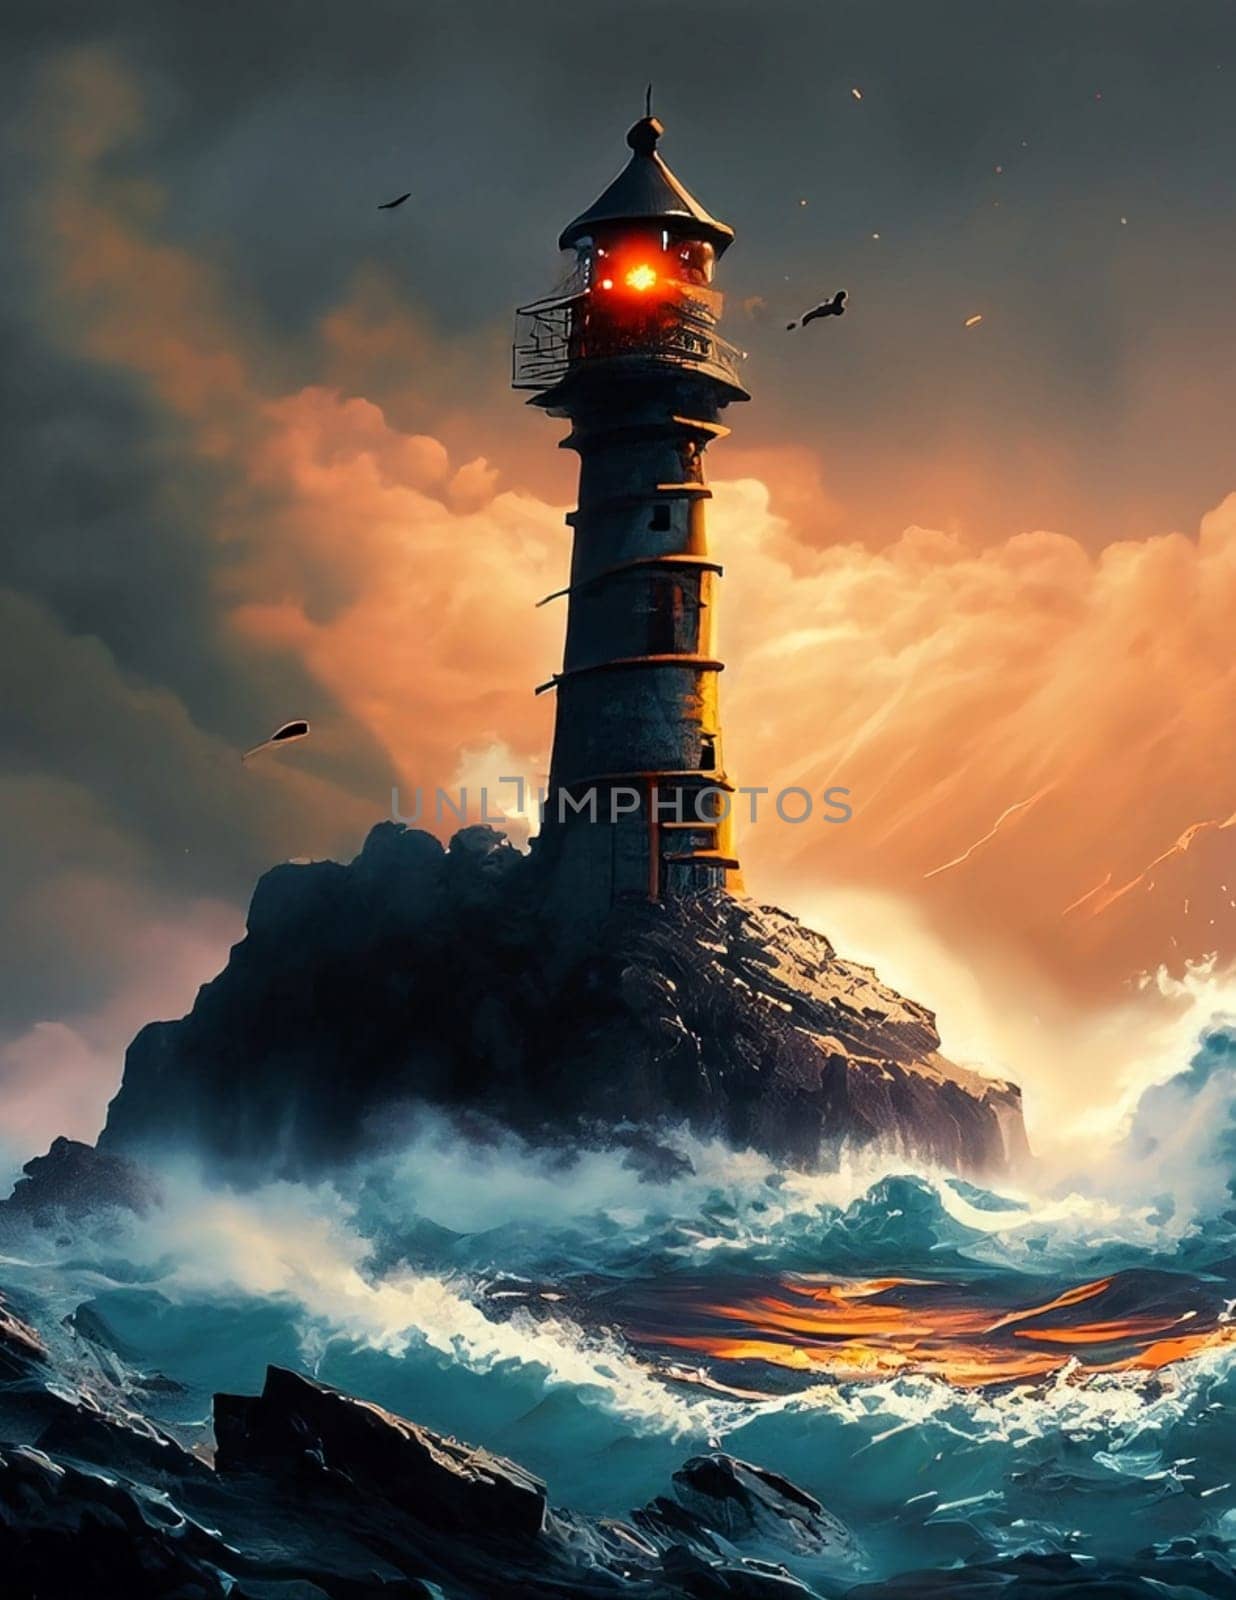 Lighthouse during a lightning storm at sea. Thunderstorm in the sea. Waves crash on rocky shores and rocks. Fantasy landscape. Artistic oil painting. Artwork sketch. Gaming background. by Costin